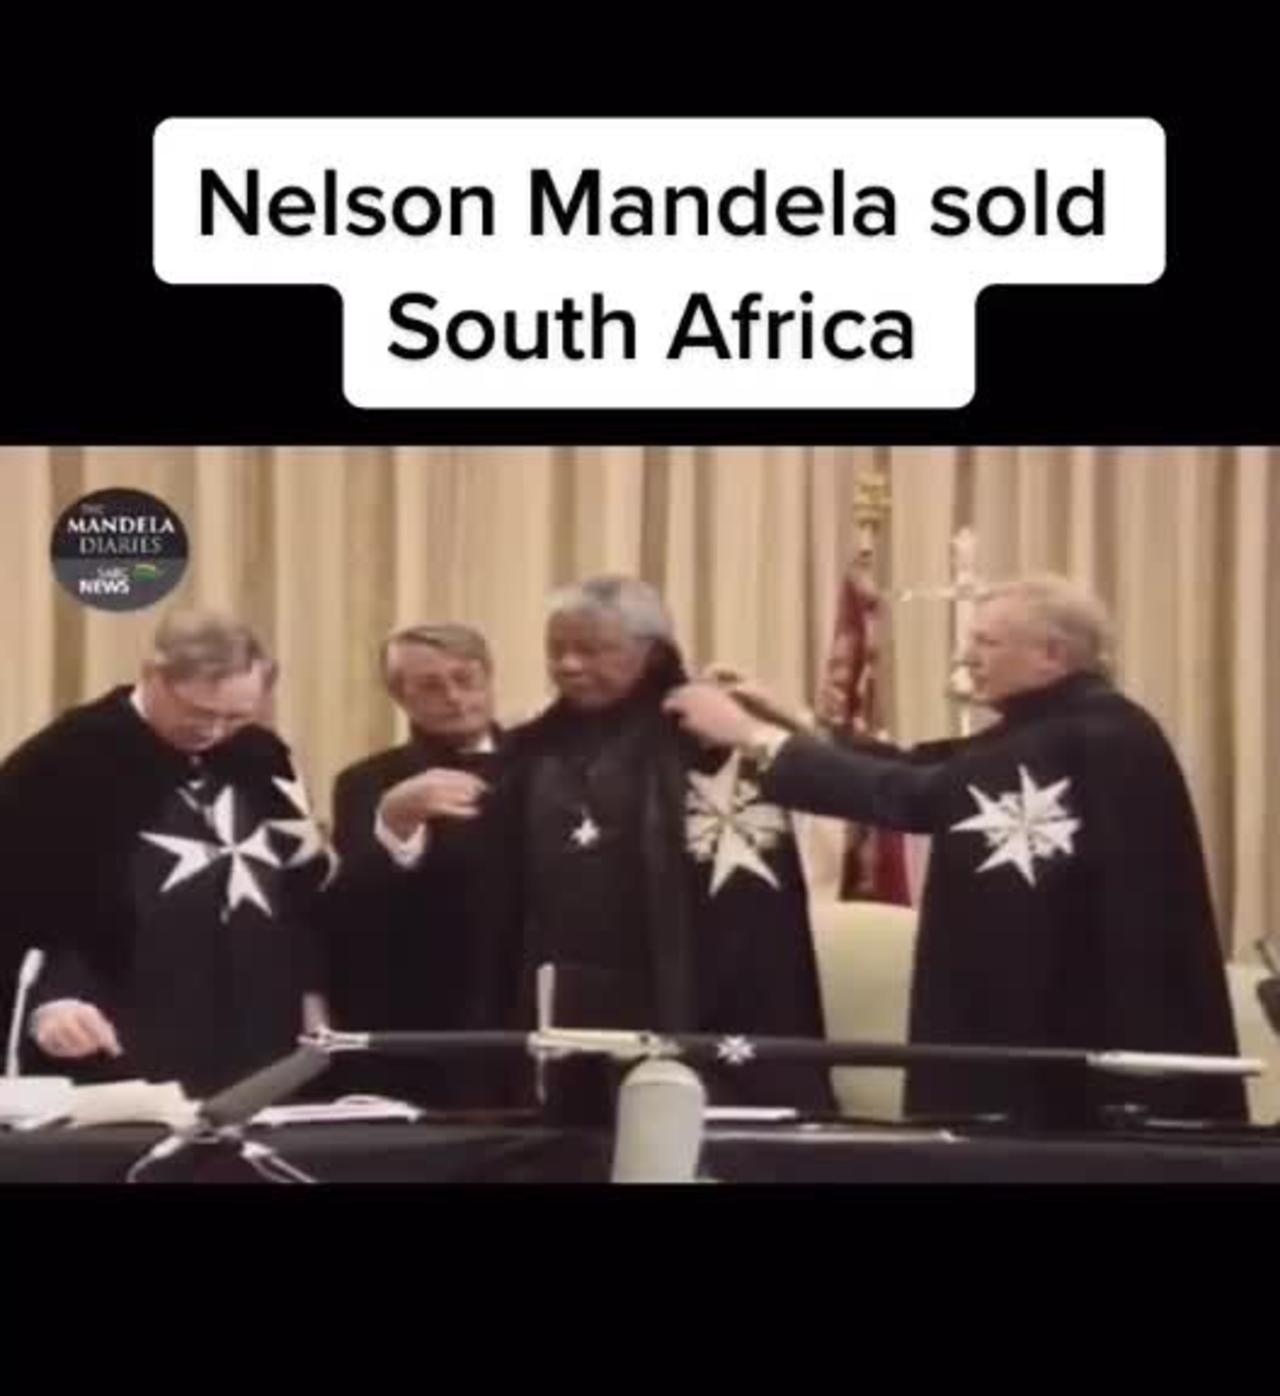 Nelson Madella sold South Africa